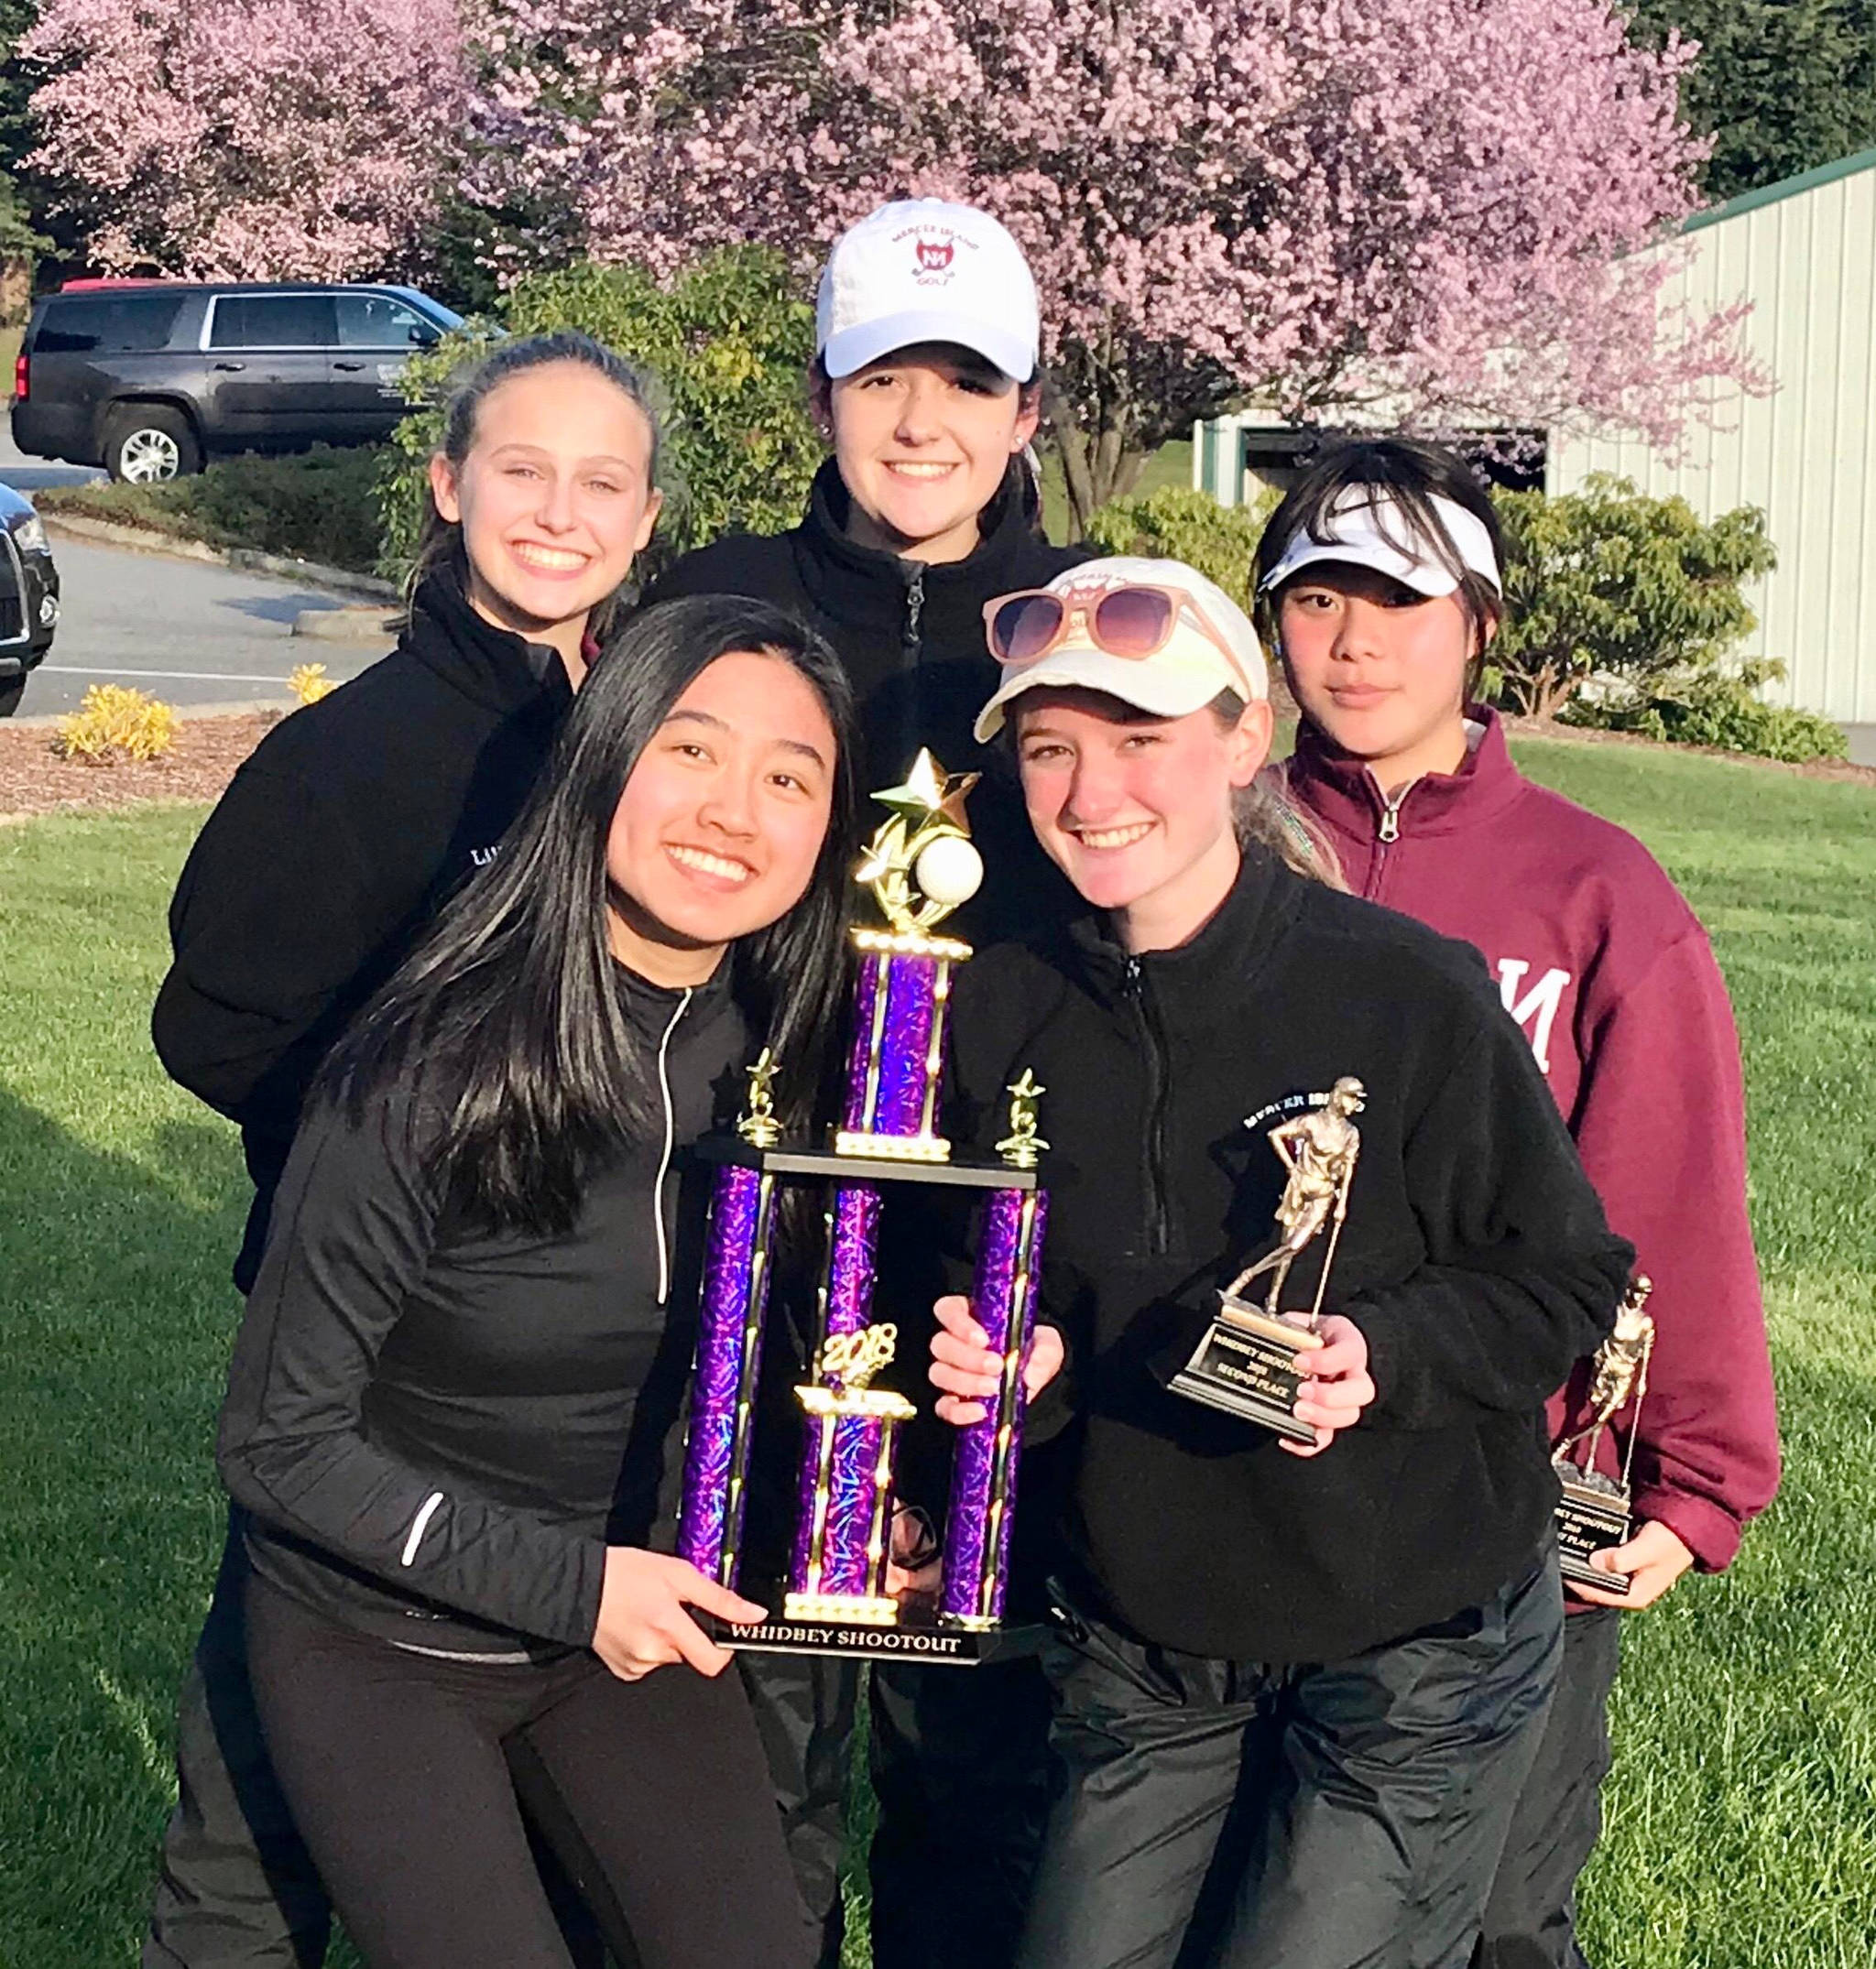 Photo courtesy of Billy Pruchno                                The Mercer Island Islanders girls golf team captured first place at the Whidbey Shootout at the Whidbey Golf Club on March 20.                                The tournament, which featured 100 golfers from 15 different high school programs, was dominated by the Islanders. Mercer Island won the tournament, compiling a score of 330 strokes. Bellingham finished in second place with a distant 384 strokes. The Islanders broke the tournament record by nine strokes (Islanders set the previous record in 2017 with 339 strokes). Freshman Gihoe Seo captured first place at the tournament with a score of a 77. Ella Warburg earned second place with a score of 79 strokes. Lily Pruchno nabbed fifth place, Estey Chen registered a seventh-place finish and Katelyn Davis tallied a 10th-place finish.